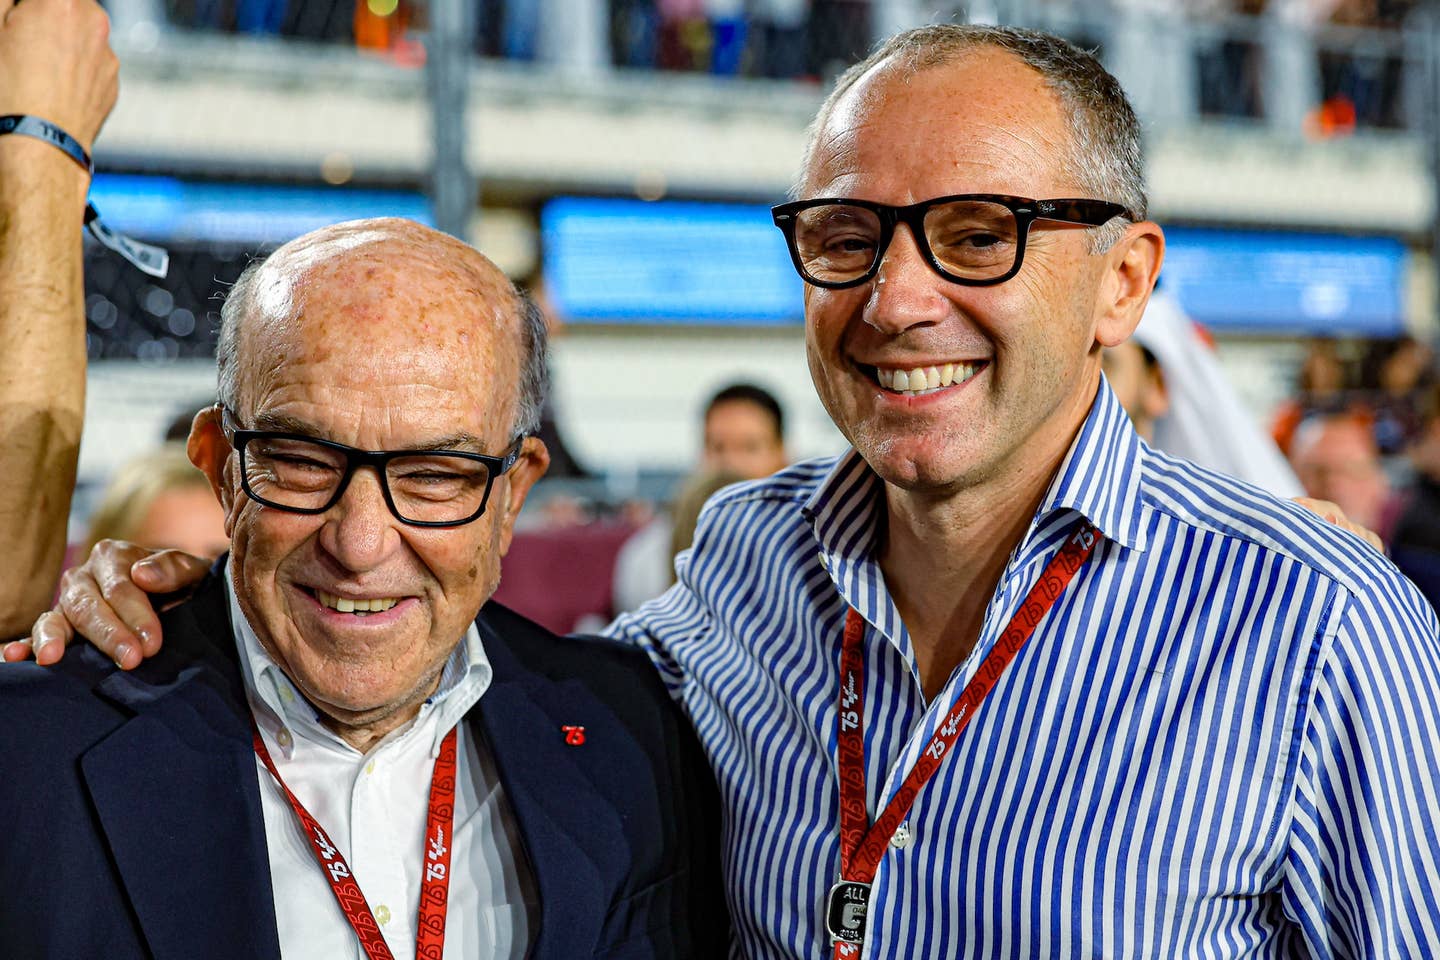 CEO of Dorna Sports Carmelo Ezpeleta and F1 CEO Stefano Domenicali on the grid before the start of the MotoGP Grand Prix of Qatar. <em>Getty Images</em>